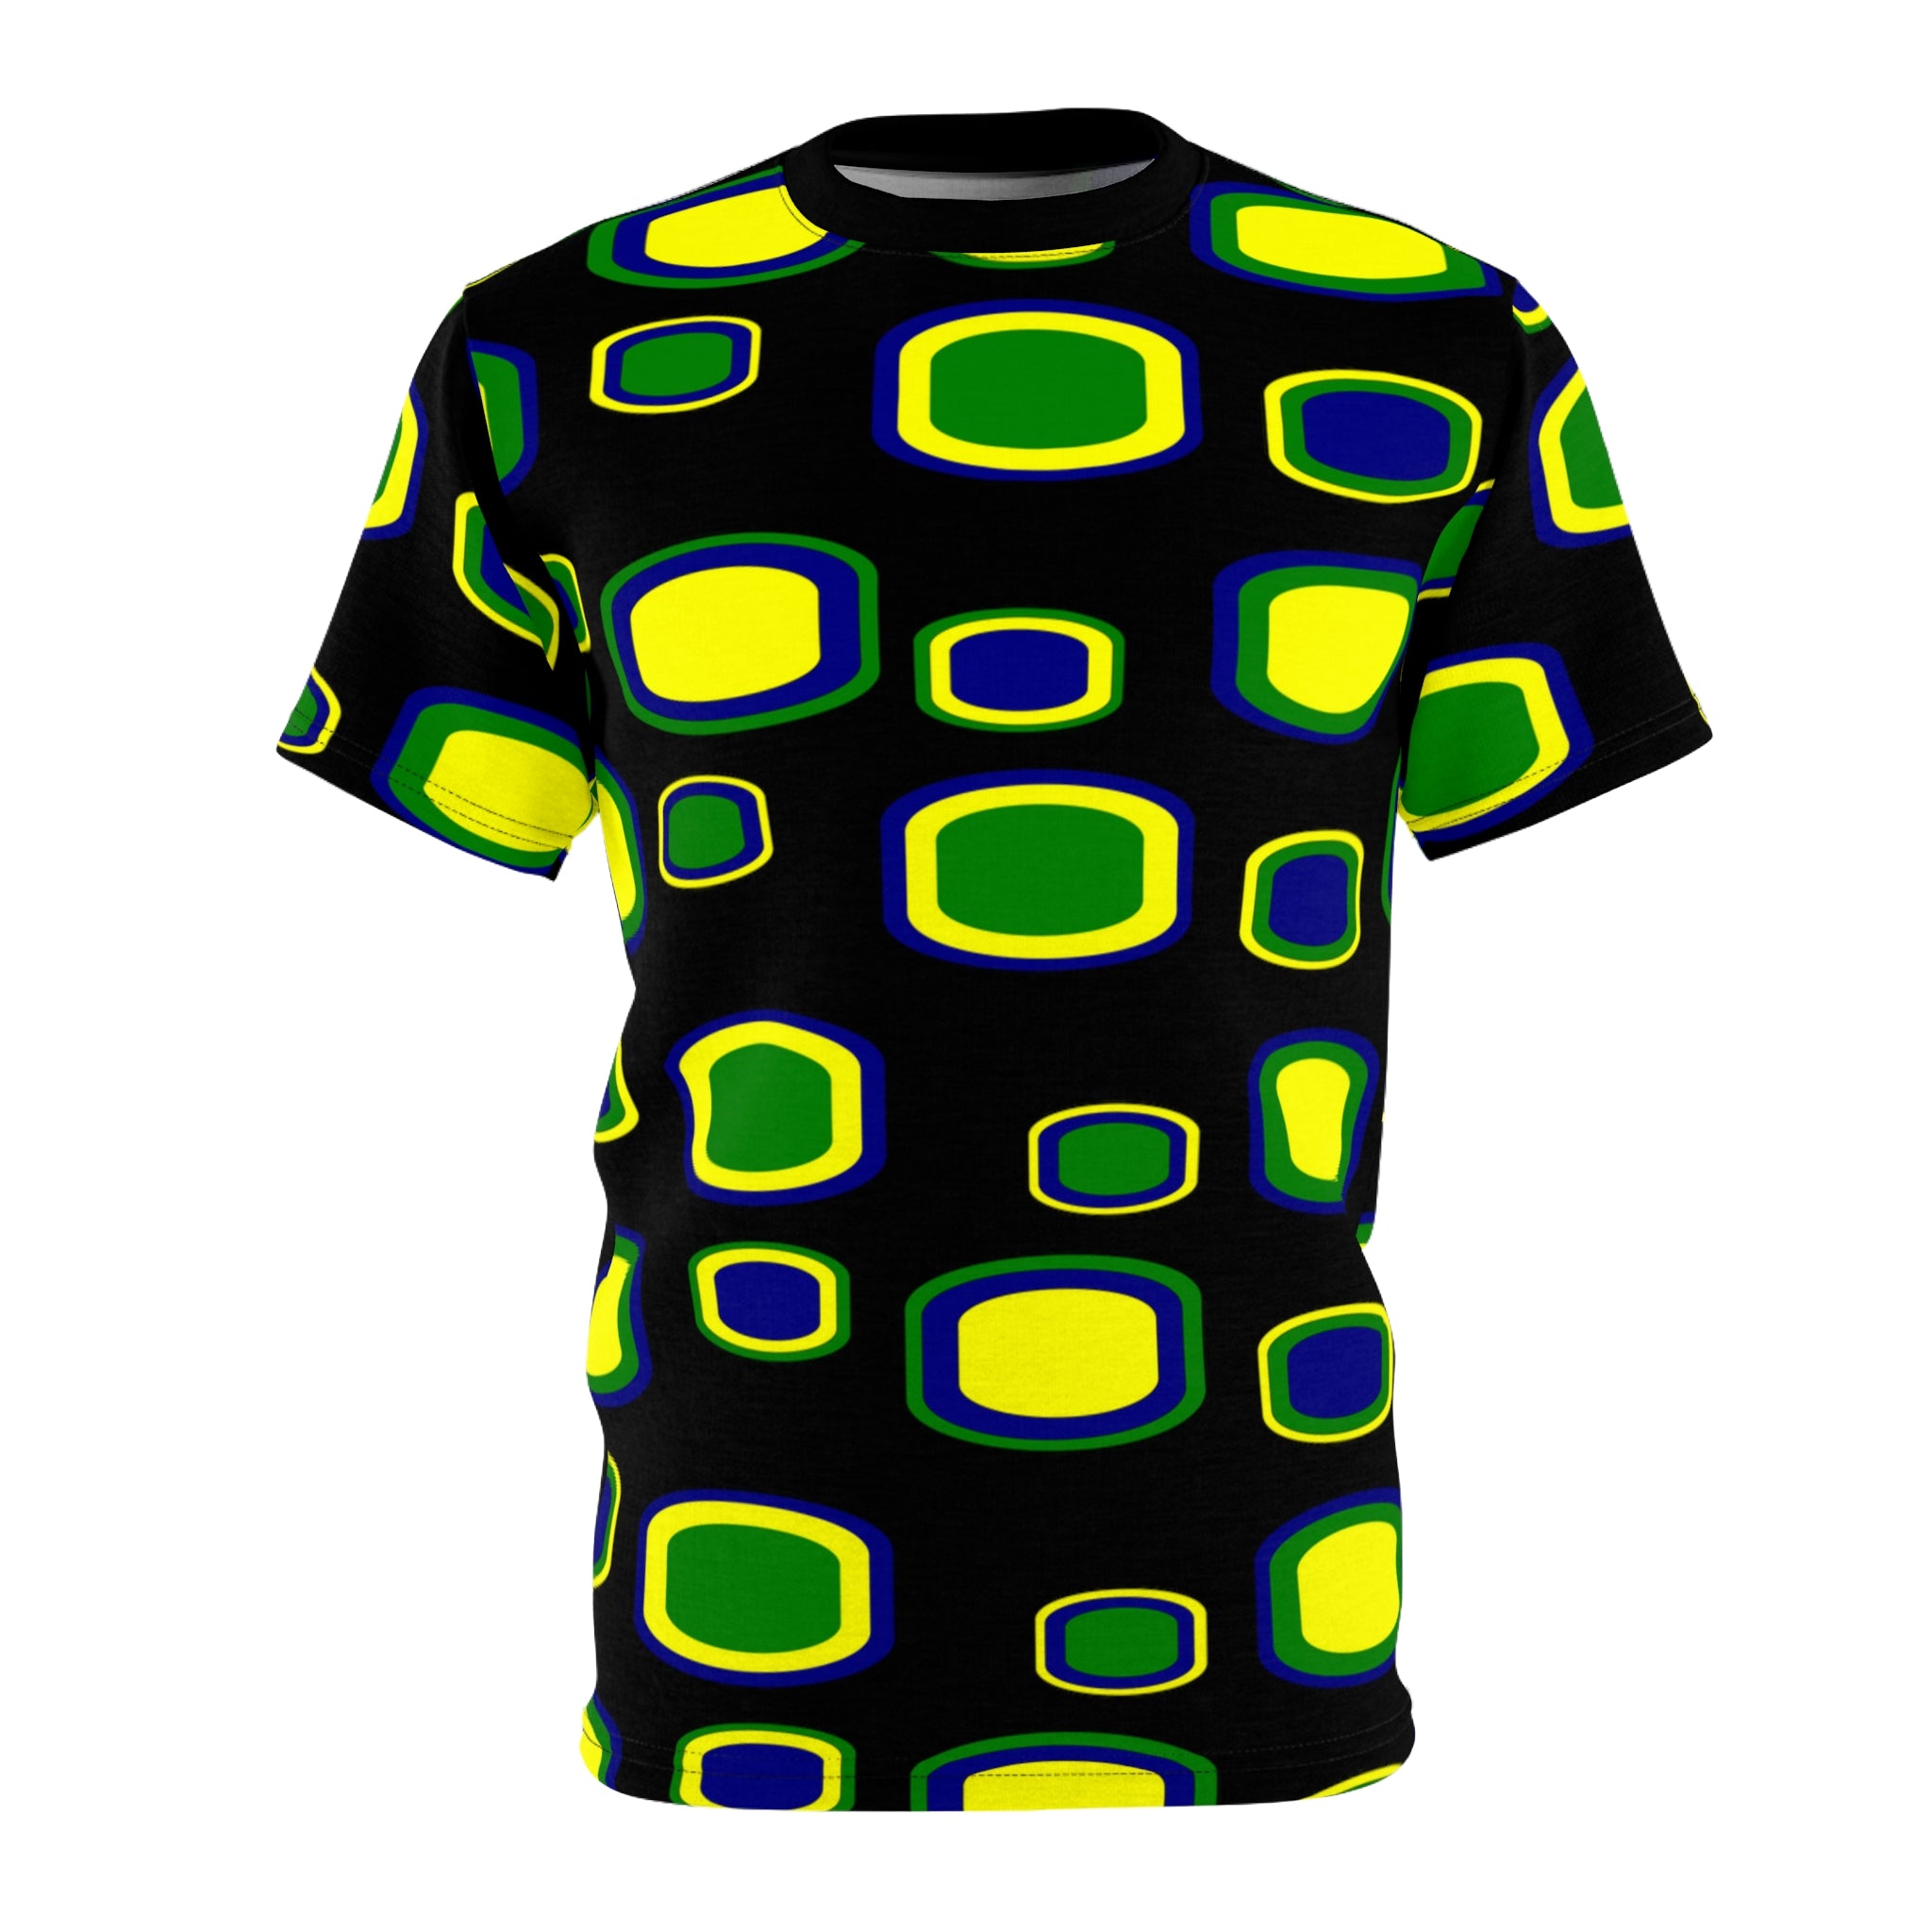 Black t-shirt with St. Vincent and the Grenadines' national colored cubes